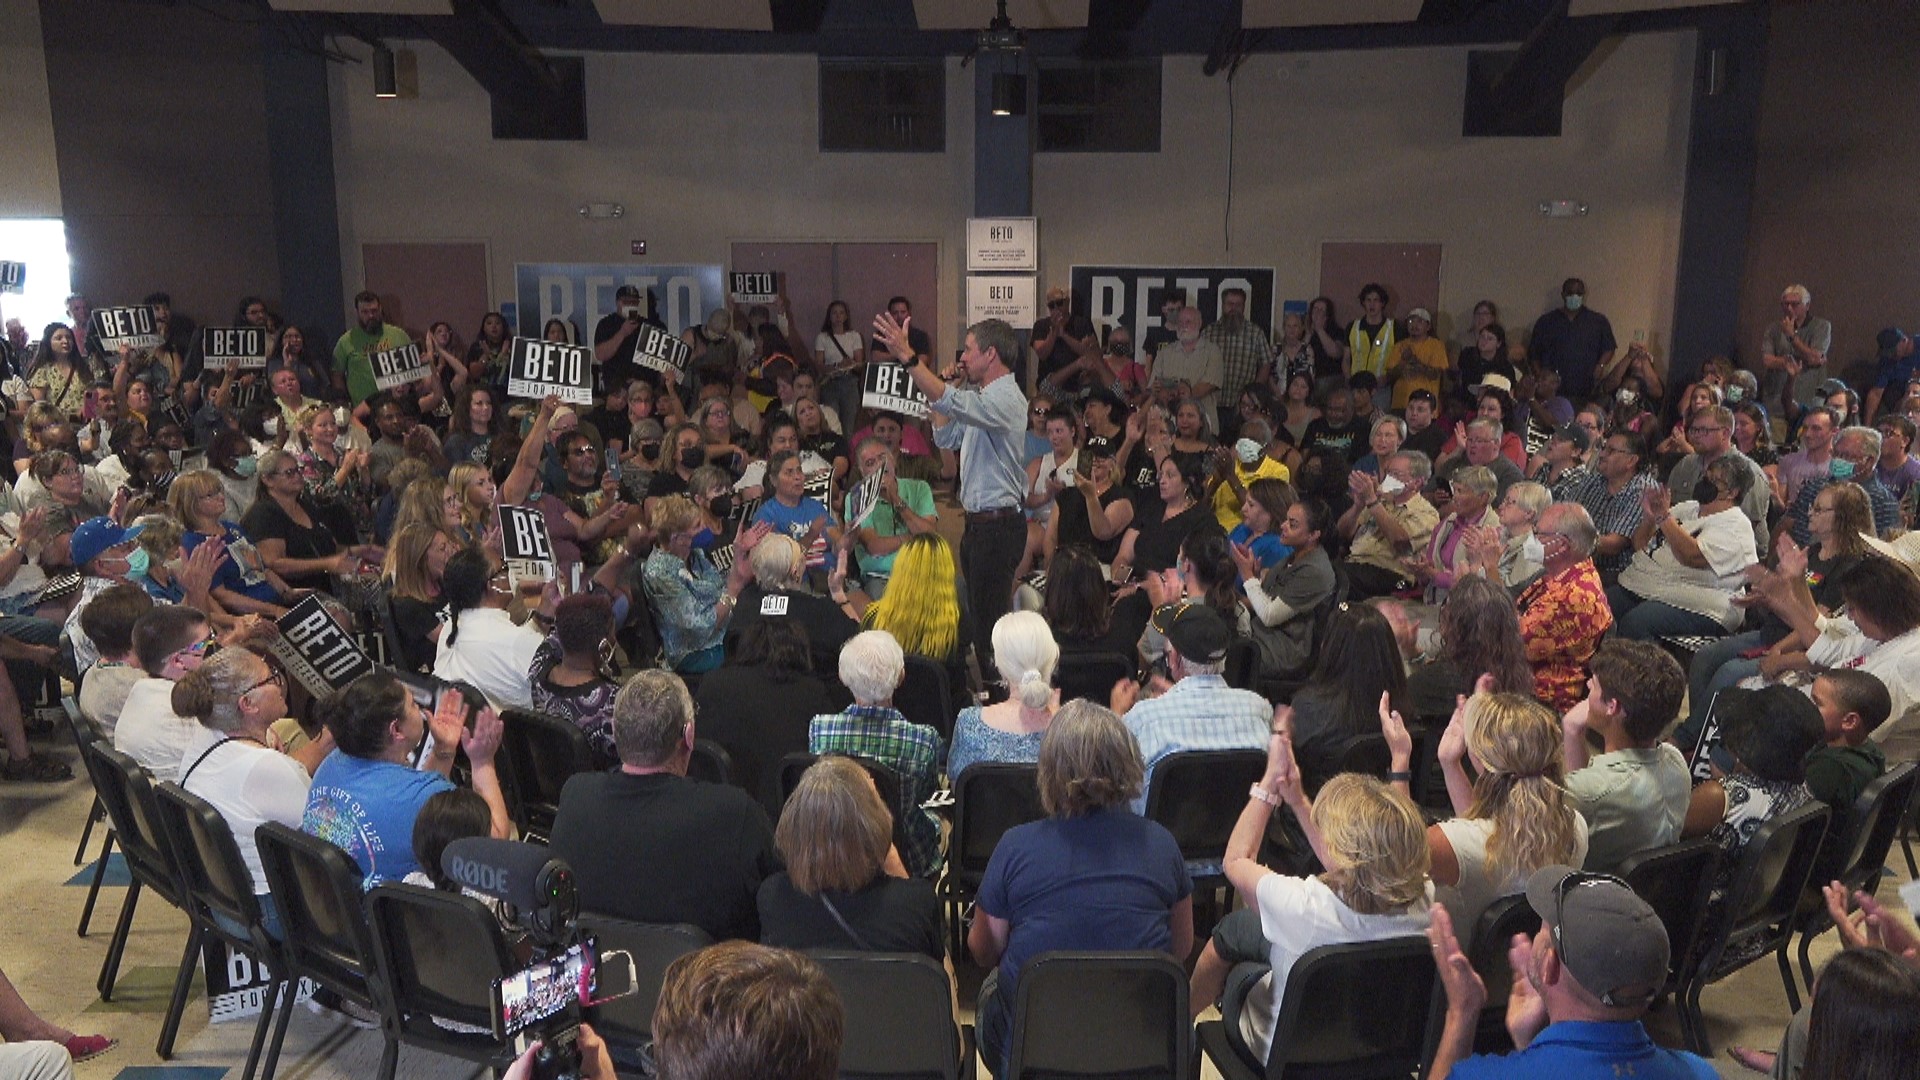 As a part of his 49-day 'Drive for Texas,' Beto O'Rourke hosted a town hall in Midland where he discussed topics like abortion, gun laws, immigration and more.